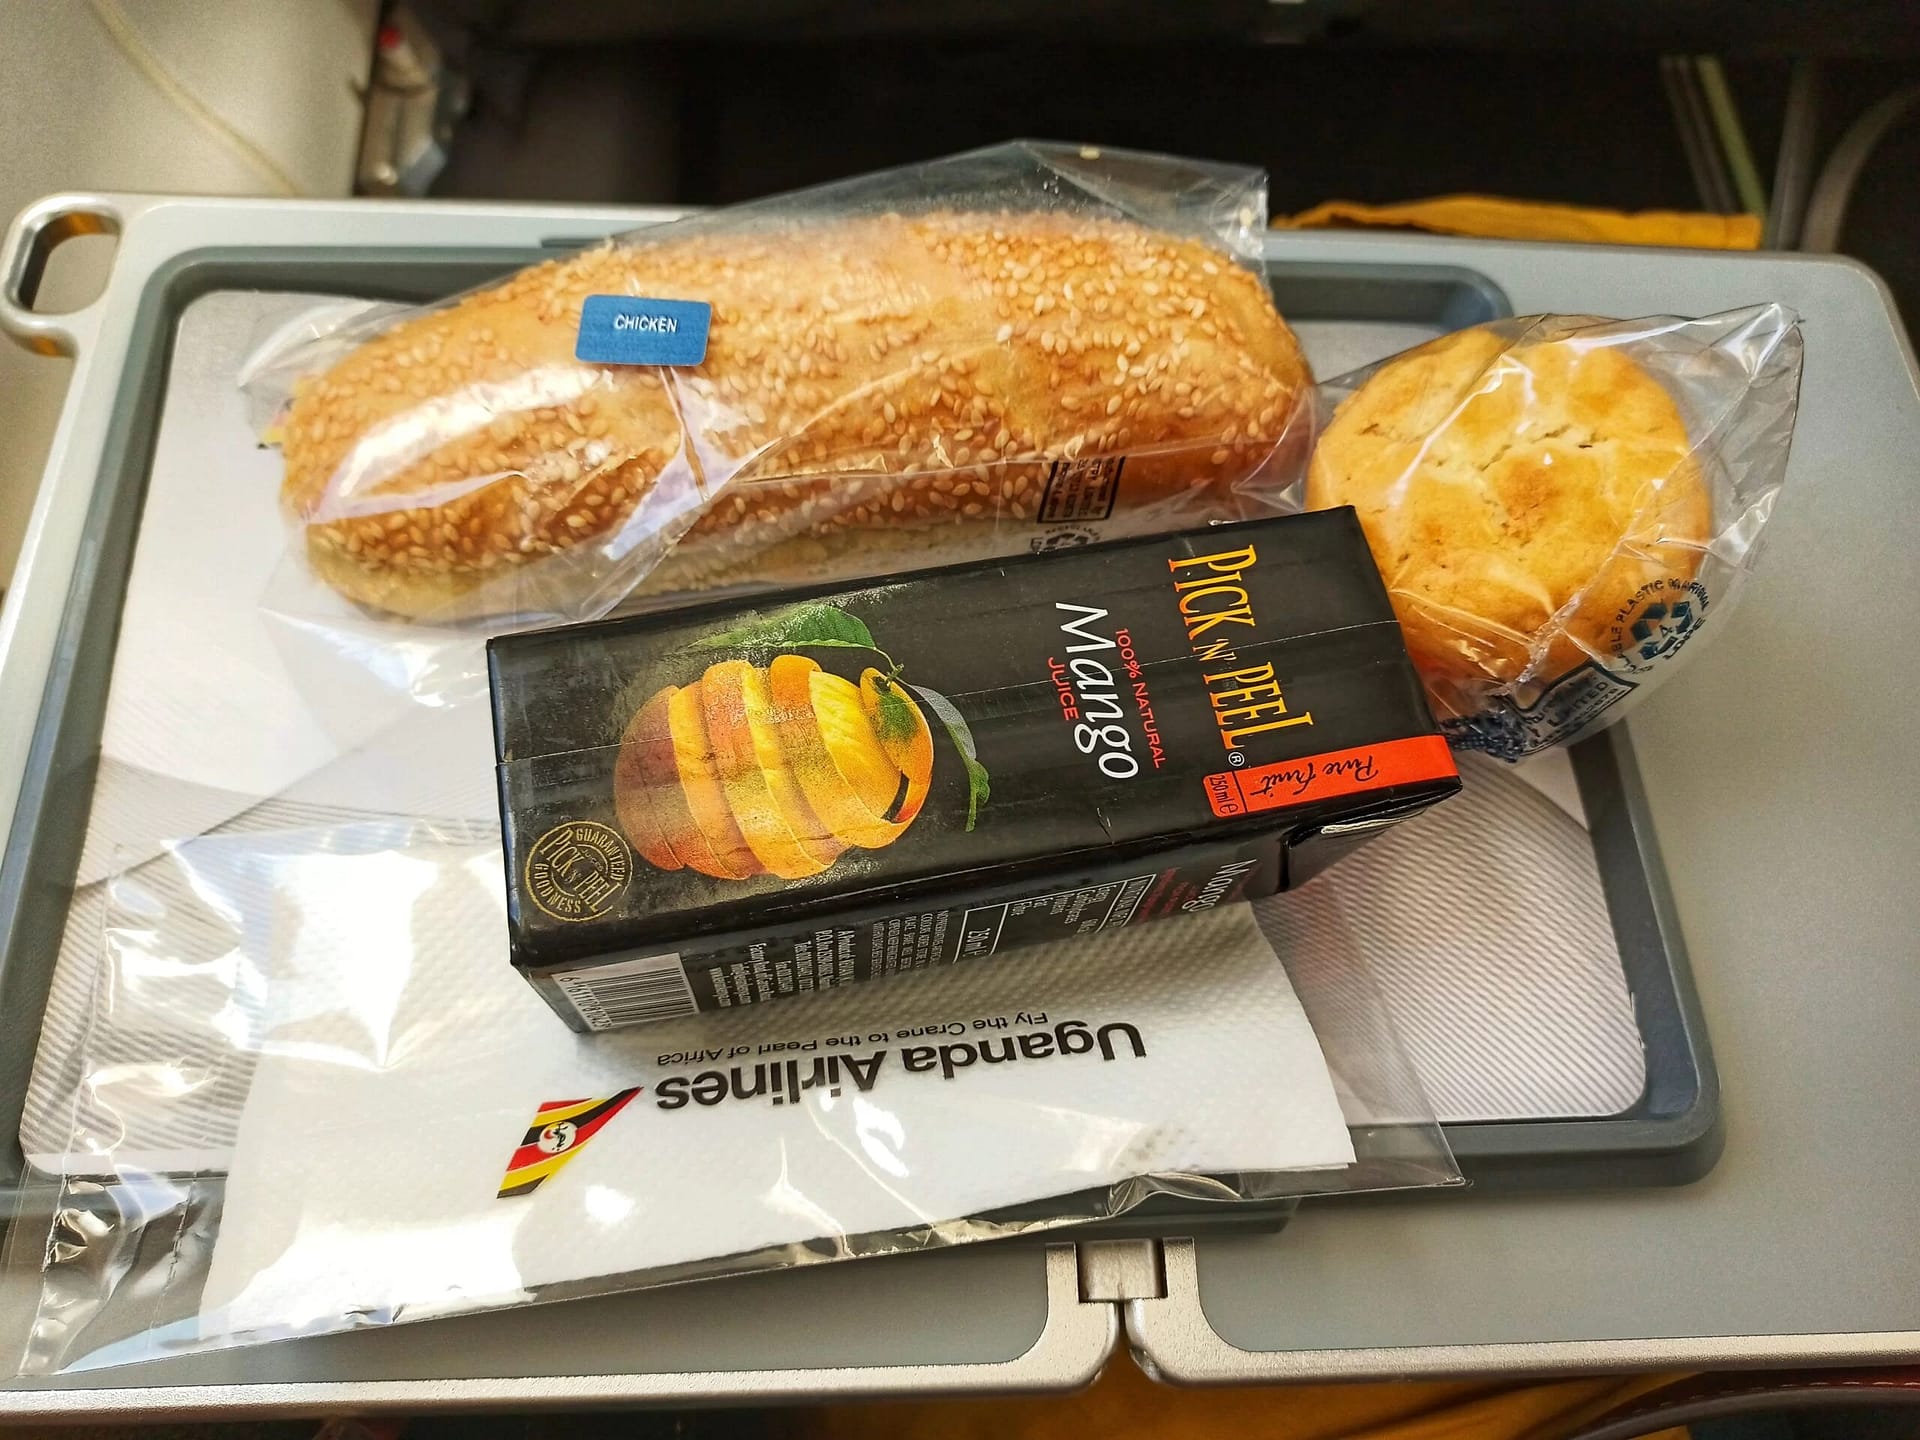 Photo of chicken sandwich, muffin and box juice on airline